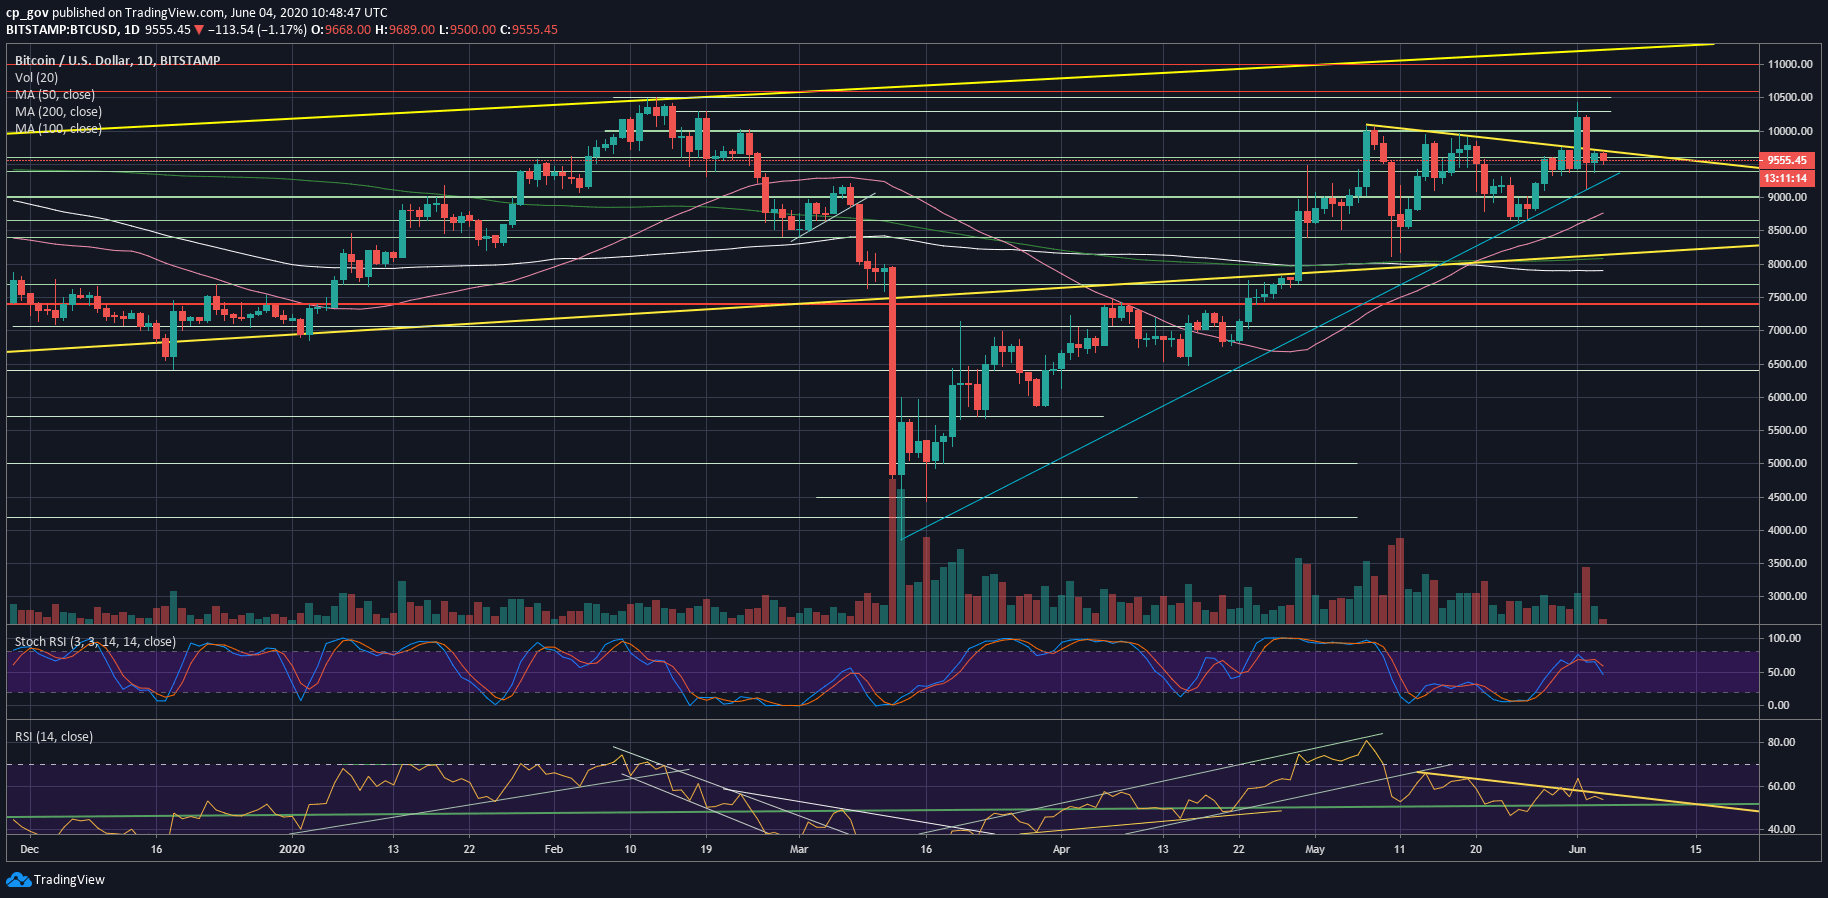 Bitcoin Price Analysis: $9000 Incoming? BTC’s After Another Failure To Break Critical Resistance